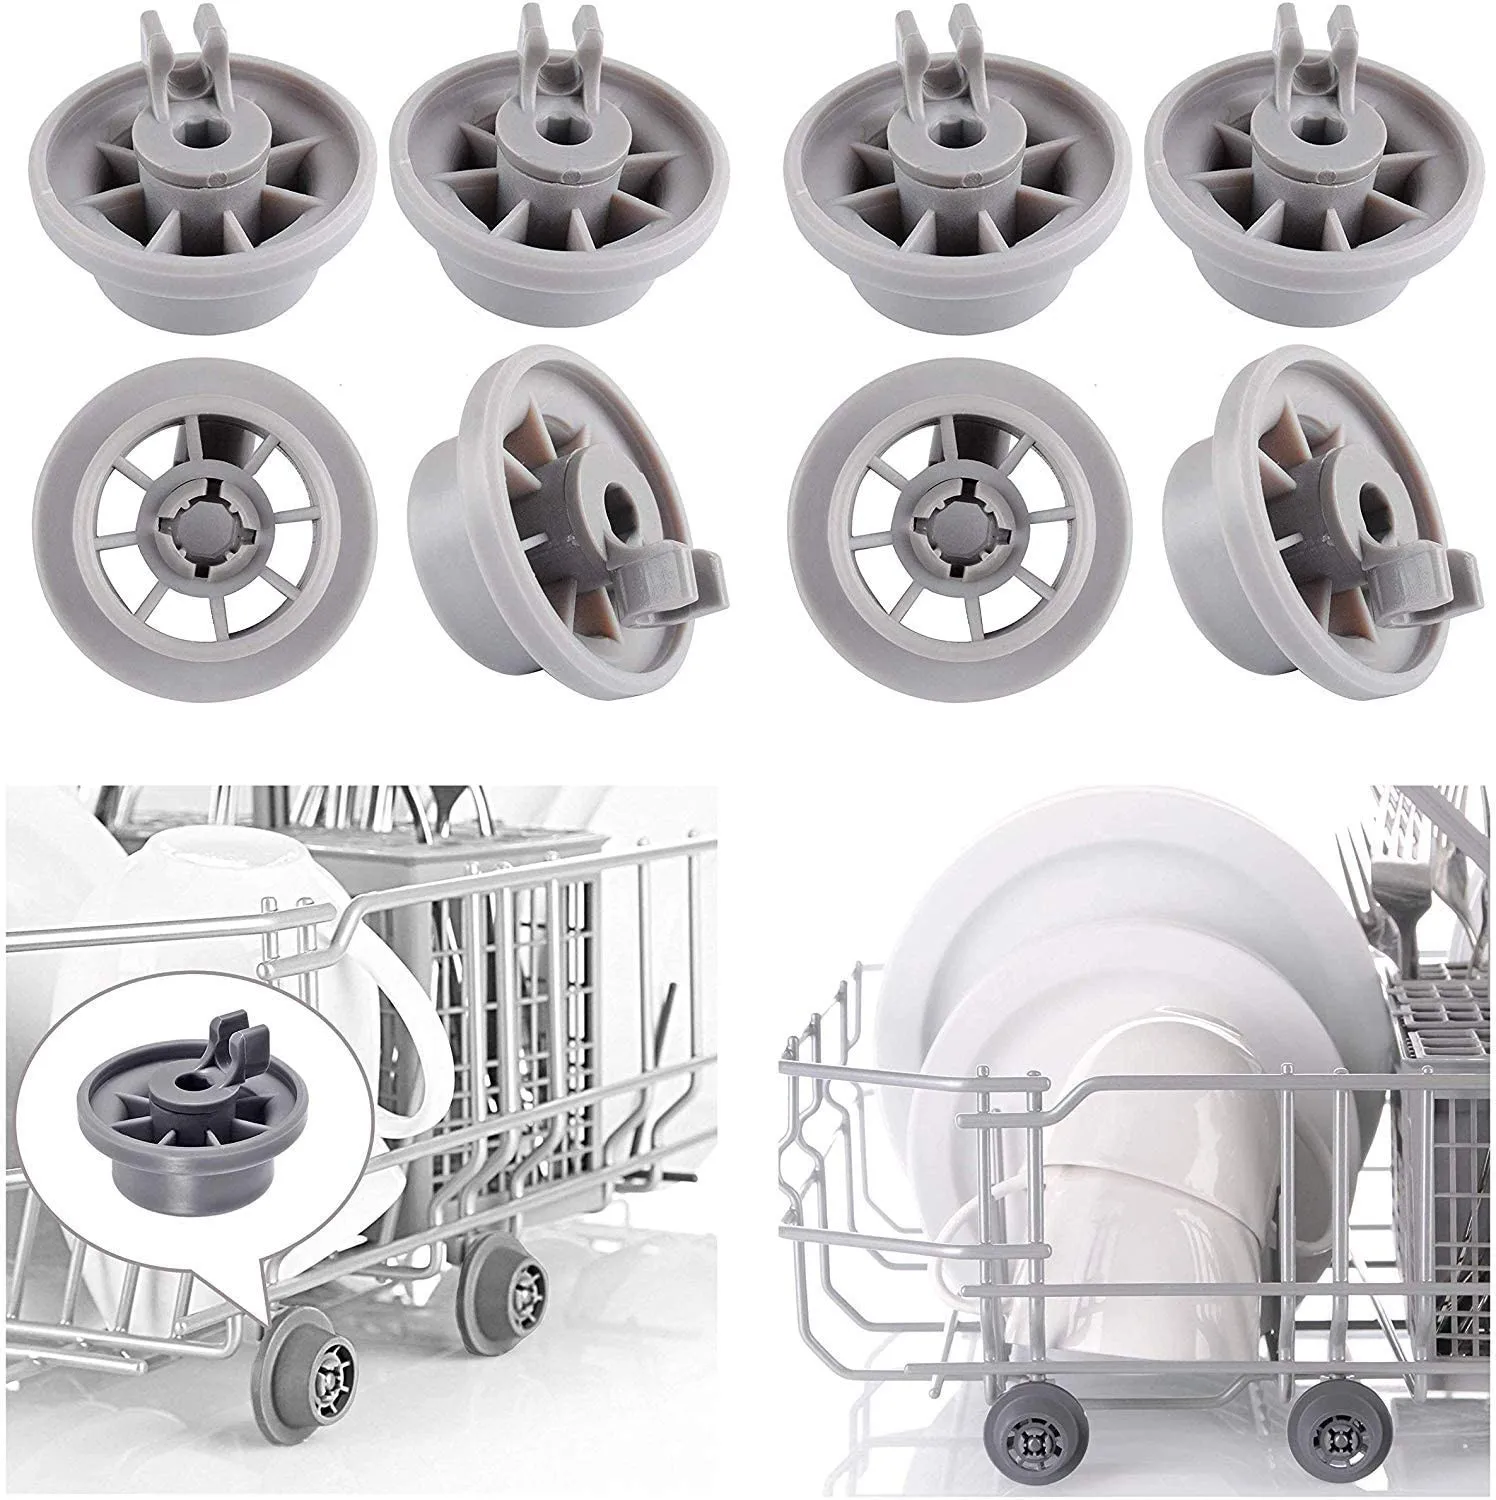 

8pcs Dishwasher Wheels Basket Rollers Wheel For Bosch Neff Spare Parts Rollers Lower Basket Dish Washer Replacement